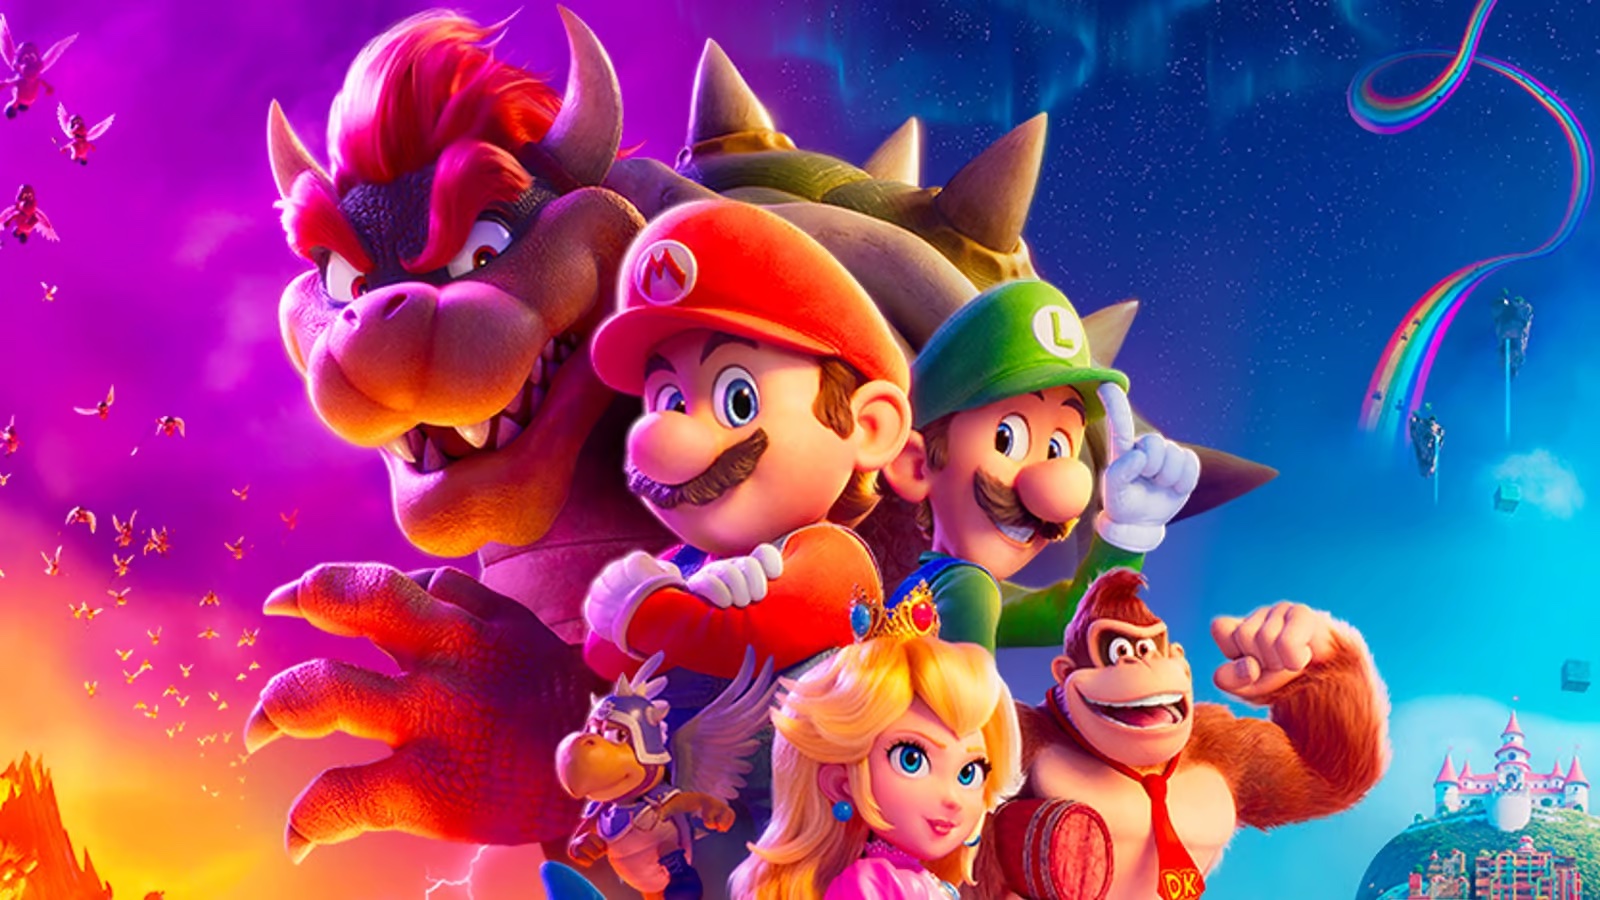 How To Watch The New Mario Movie For Free